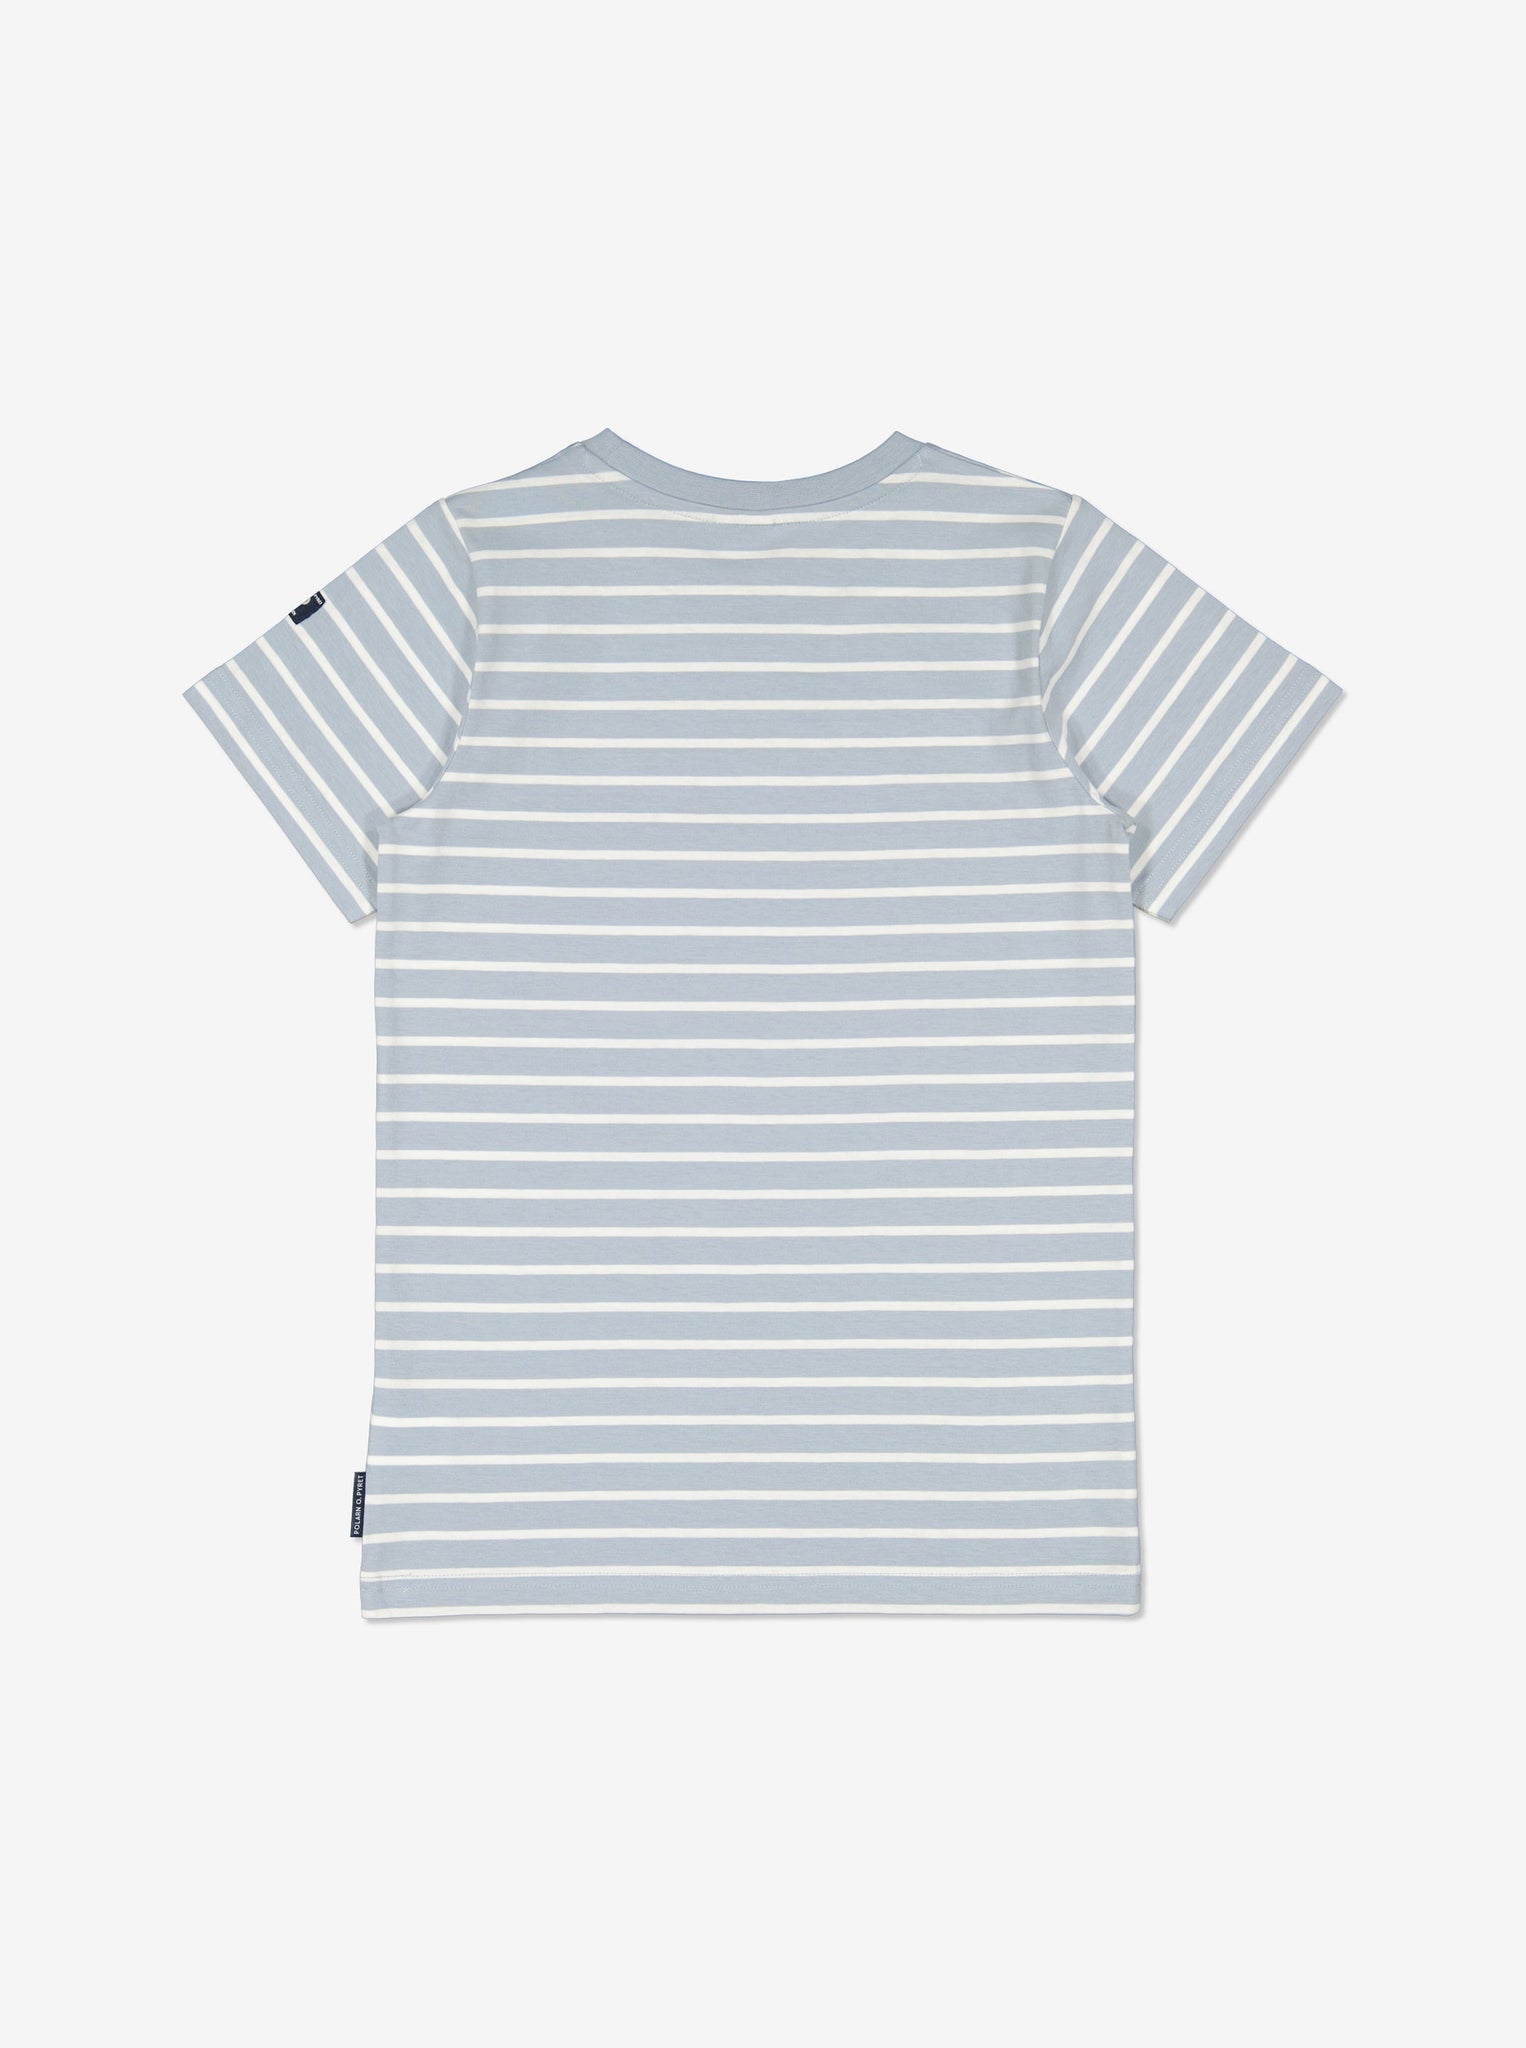  Cotton Striped Blue Kids T-Shirt from Polarn O. Pyret Kidswear. Made using ethically sourced materials.